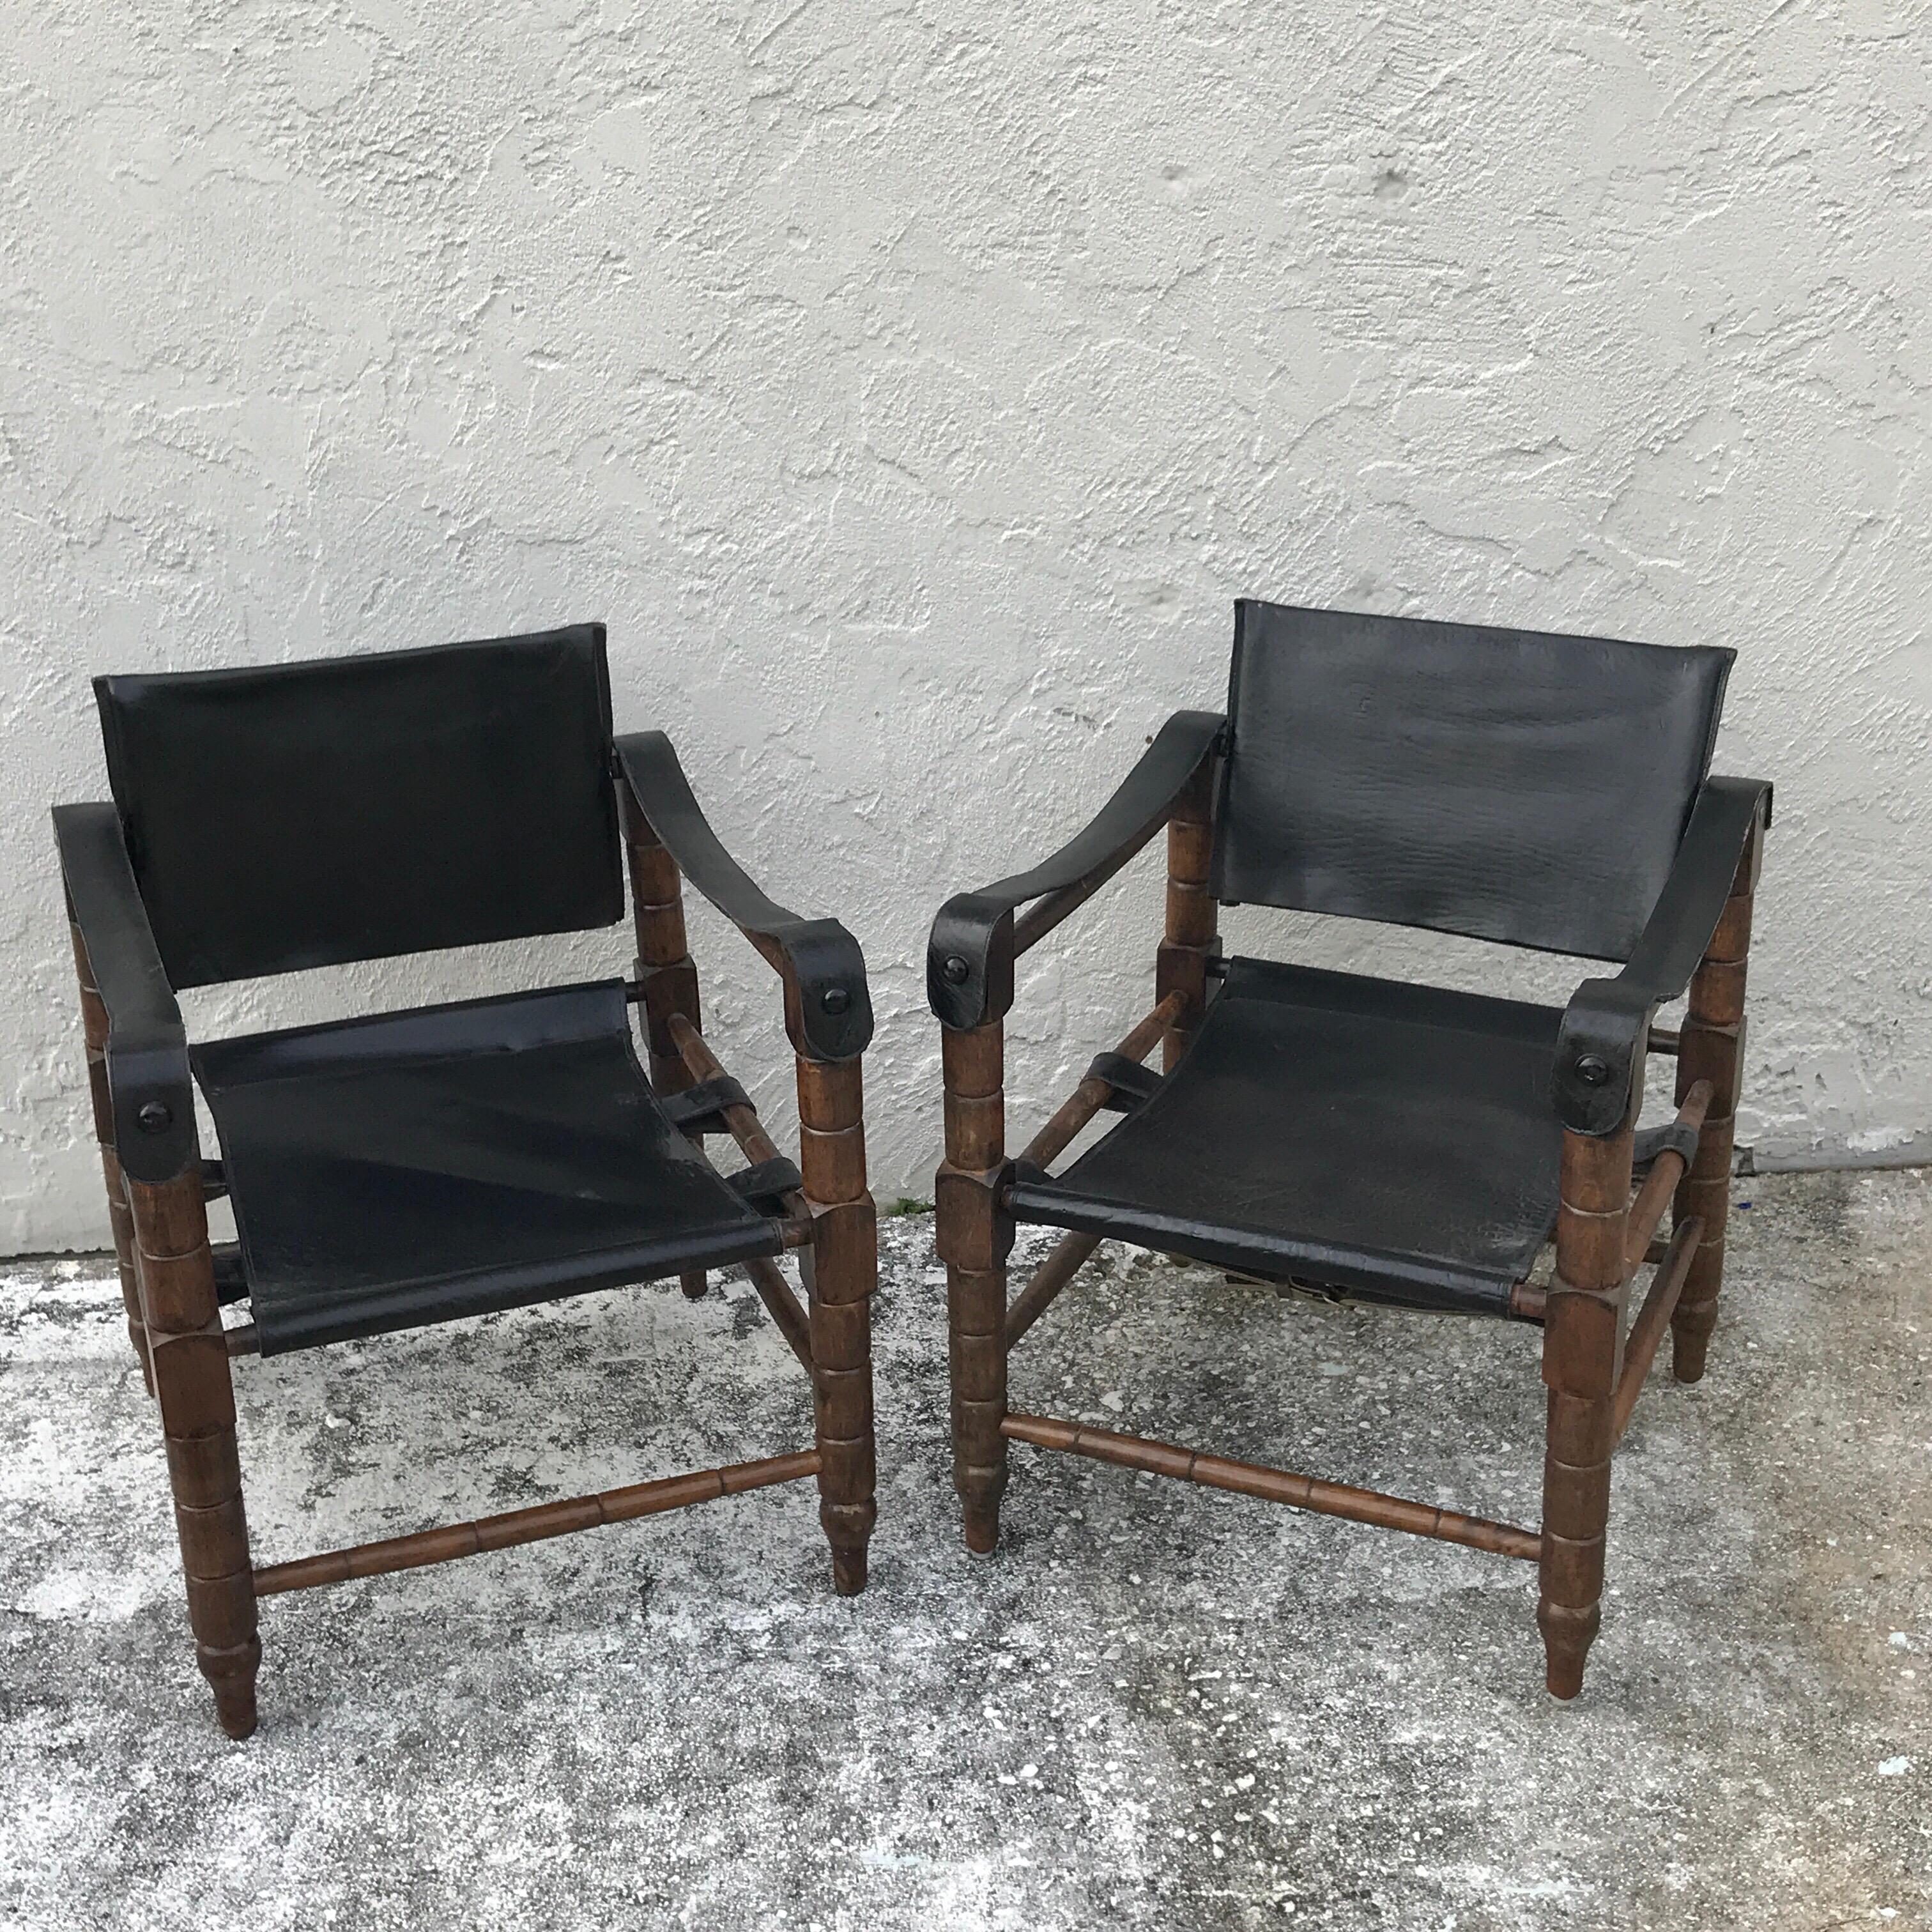 Carved Pair of Syrian Leather Campaign / Safari Chairs